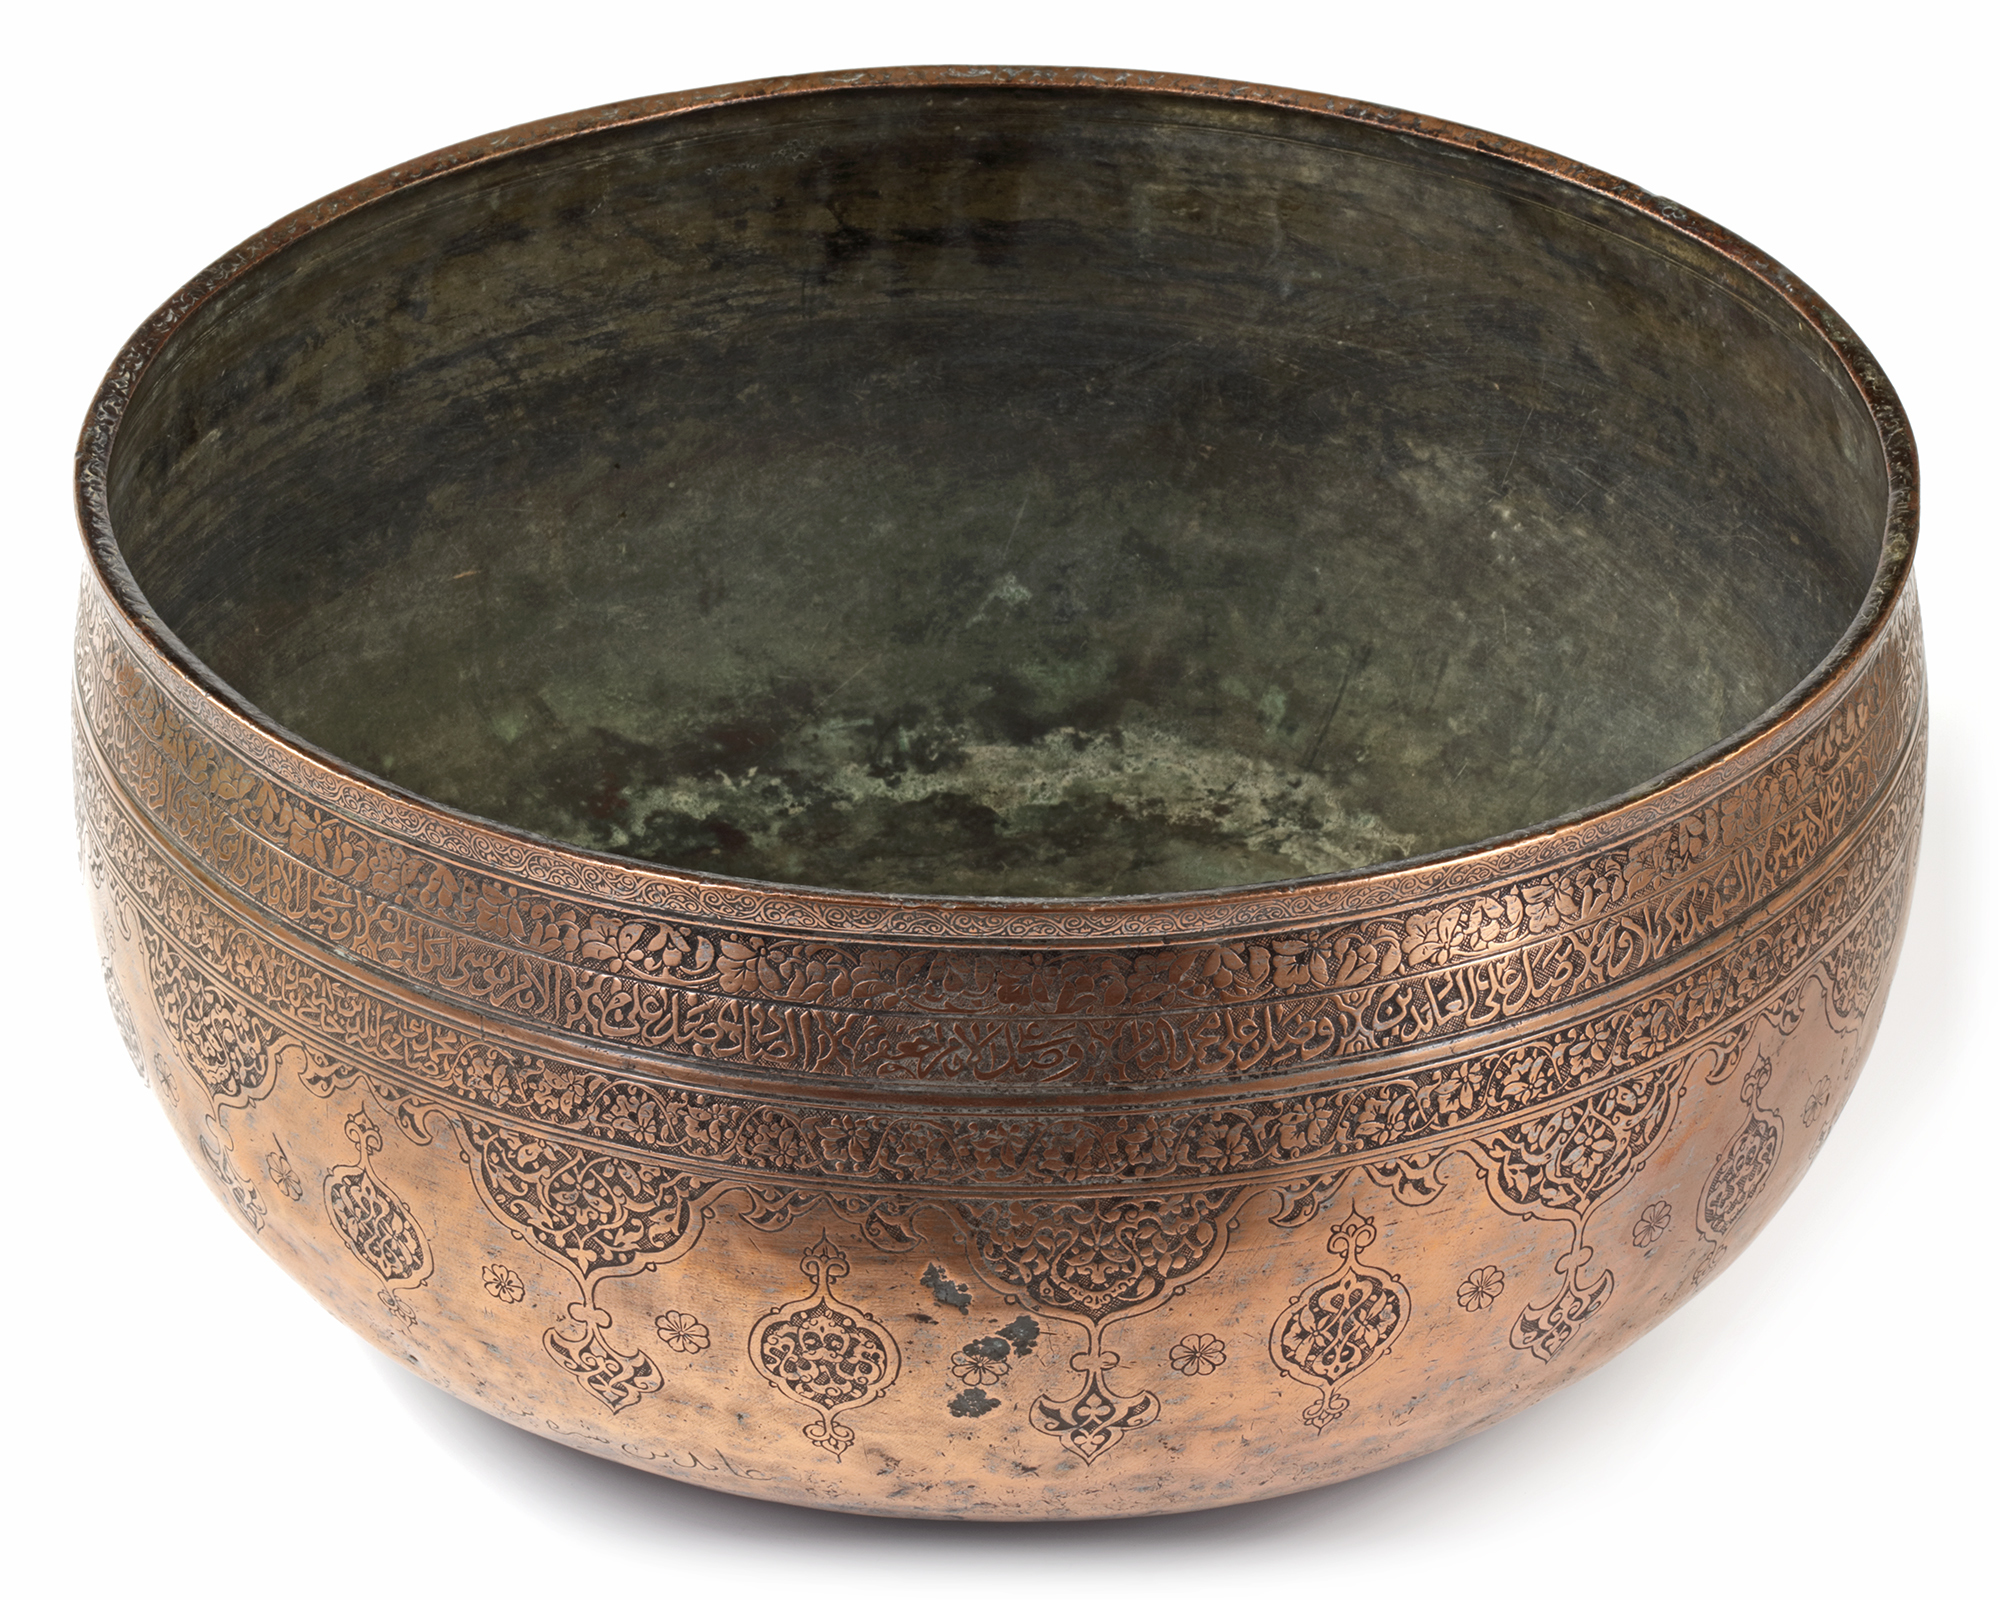 A MONUMENTAL LATE TIMURID ENGRAVED COPPER BOWL, CENTRAL ASIA, LATE 15TH-EARLY 16TH CENTURY - Image 9 of 12